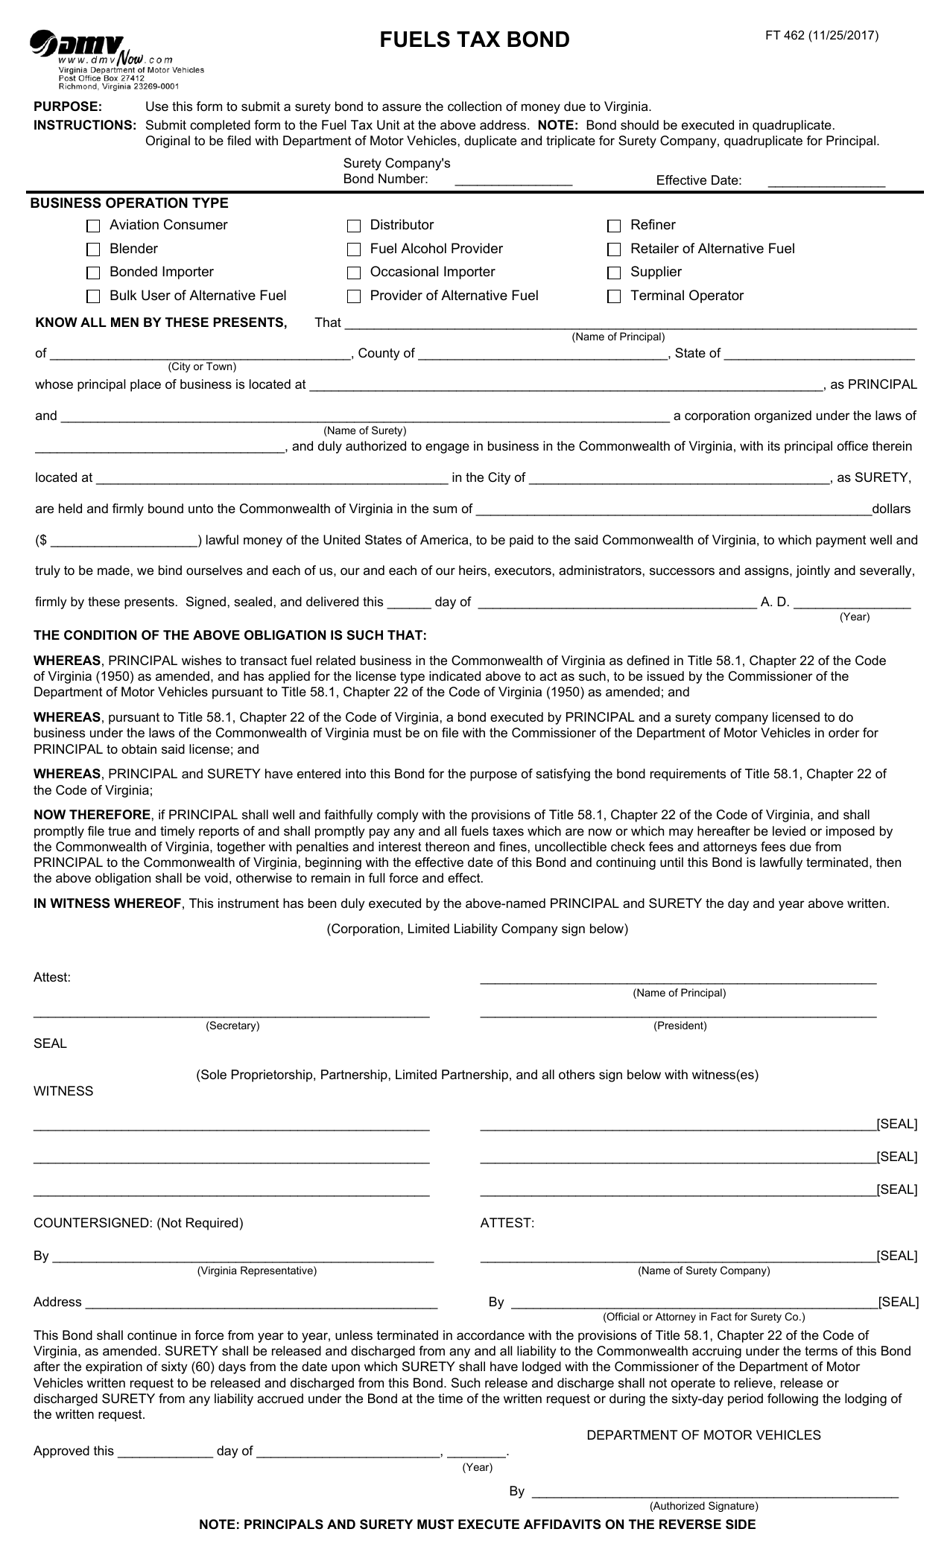 Form FT462 Fuels Tax Bond - Virginia, Page 1